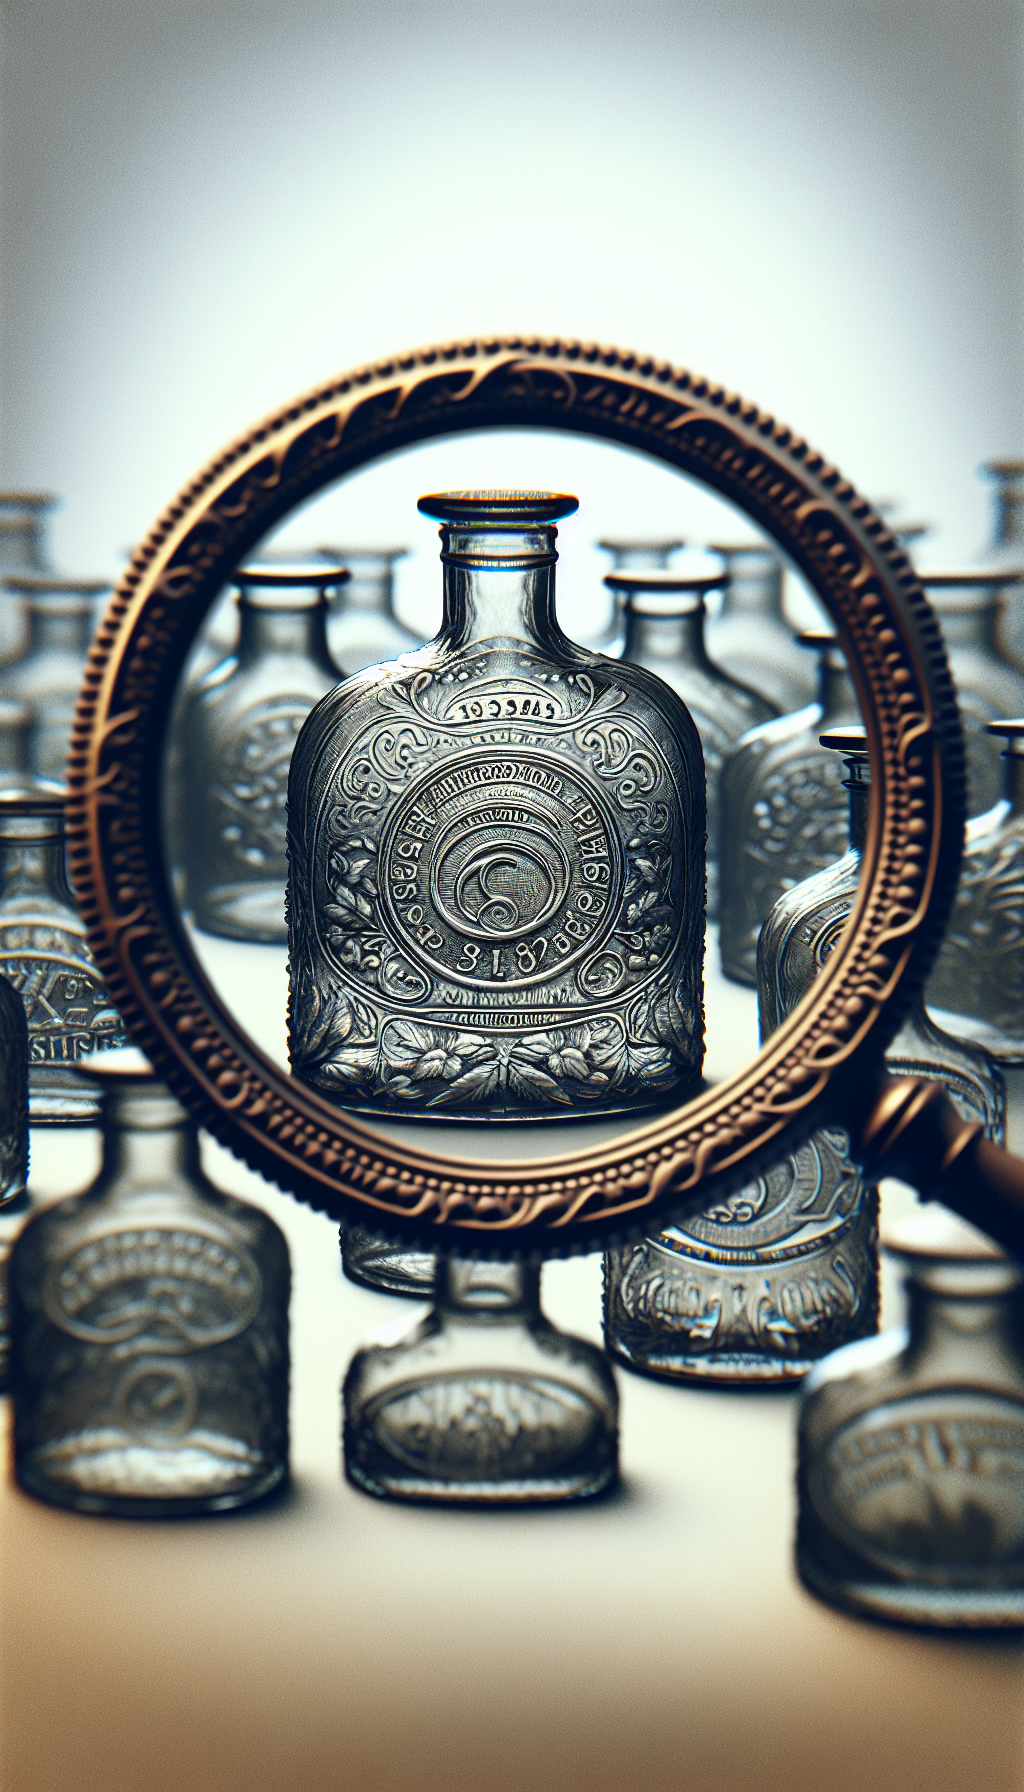 An intricate magnifying glass peers at the embossed base of an array of antique bottles, revealing a collage of historic dates and symbols beneath it. The markings transition from opaque to clear, symbolizing the process of identification, with the magnifier acting as a window into the past, where each inscription tells the age-old story of the bottle's origin.